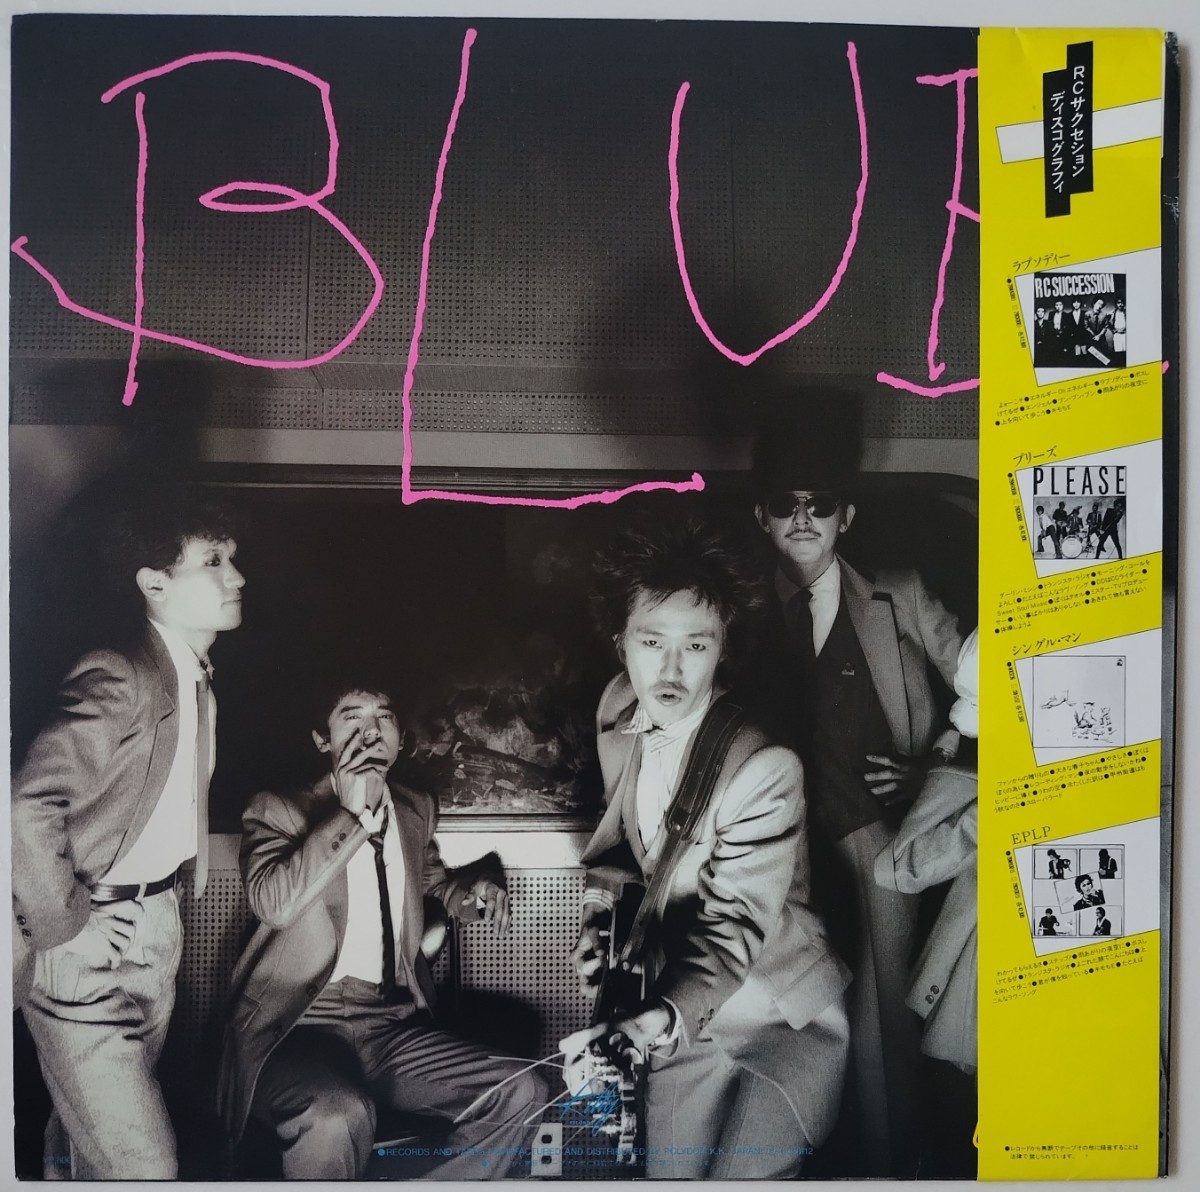 RC Succession Blue/1981 year obi attaching domestic record Kitty Records 28MK0021 RCsakseshonBLUE